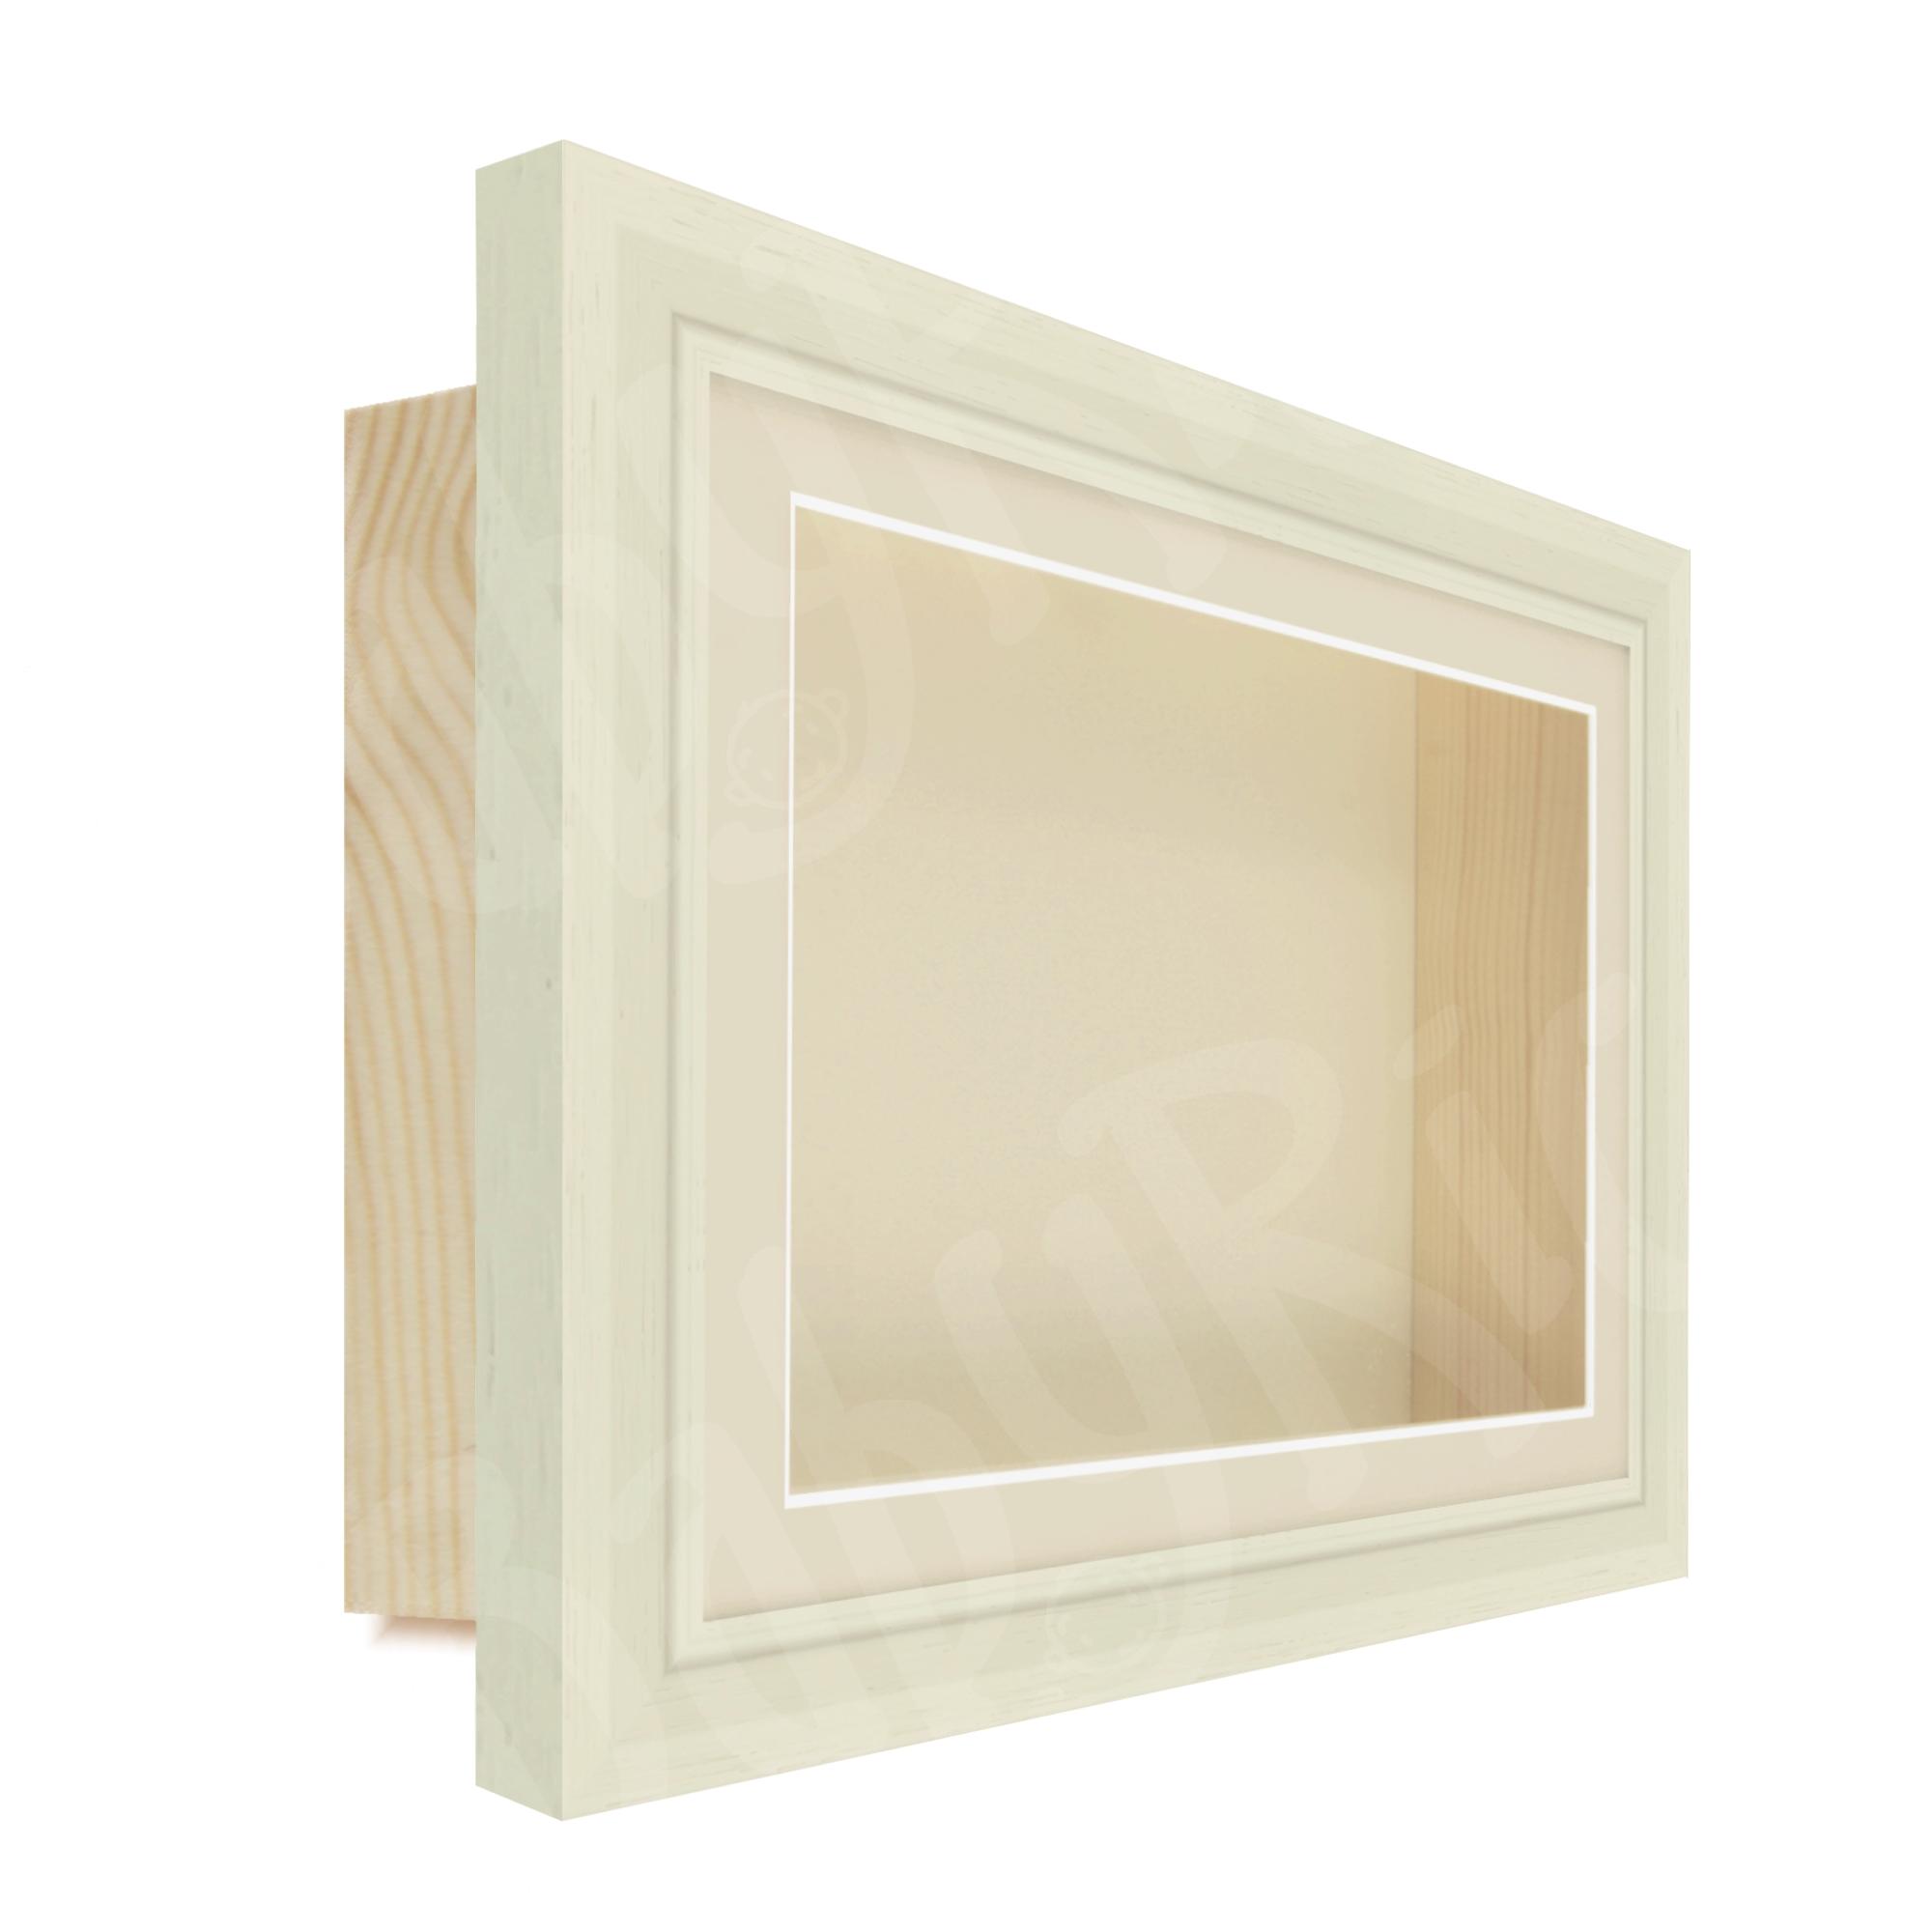 Cream Deep 3D Display Frame - Antique Mount and Backing